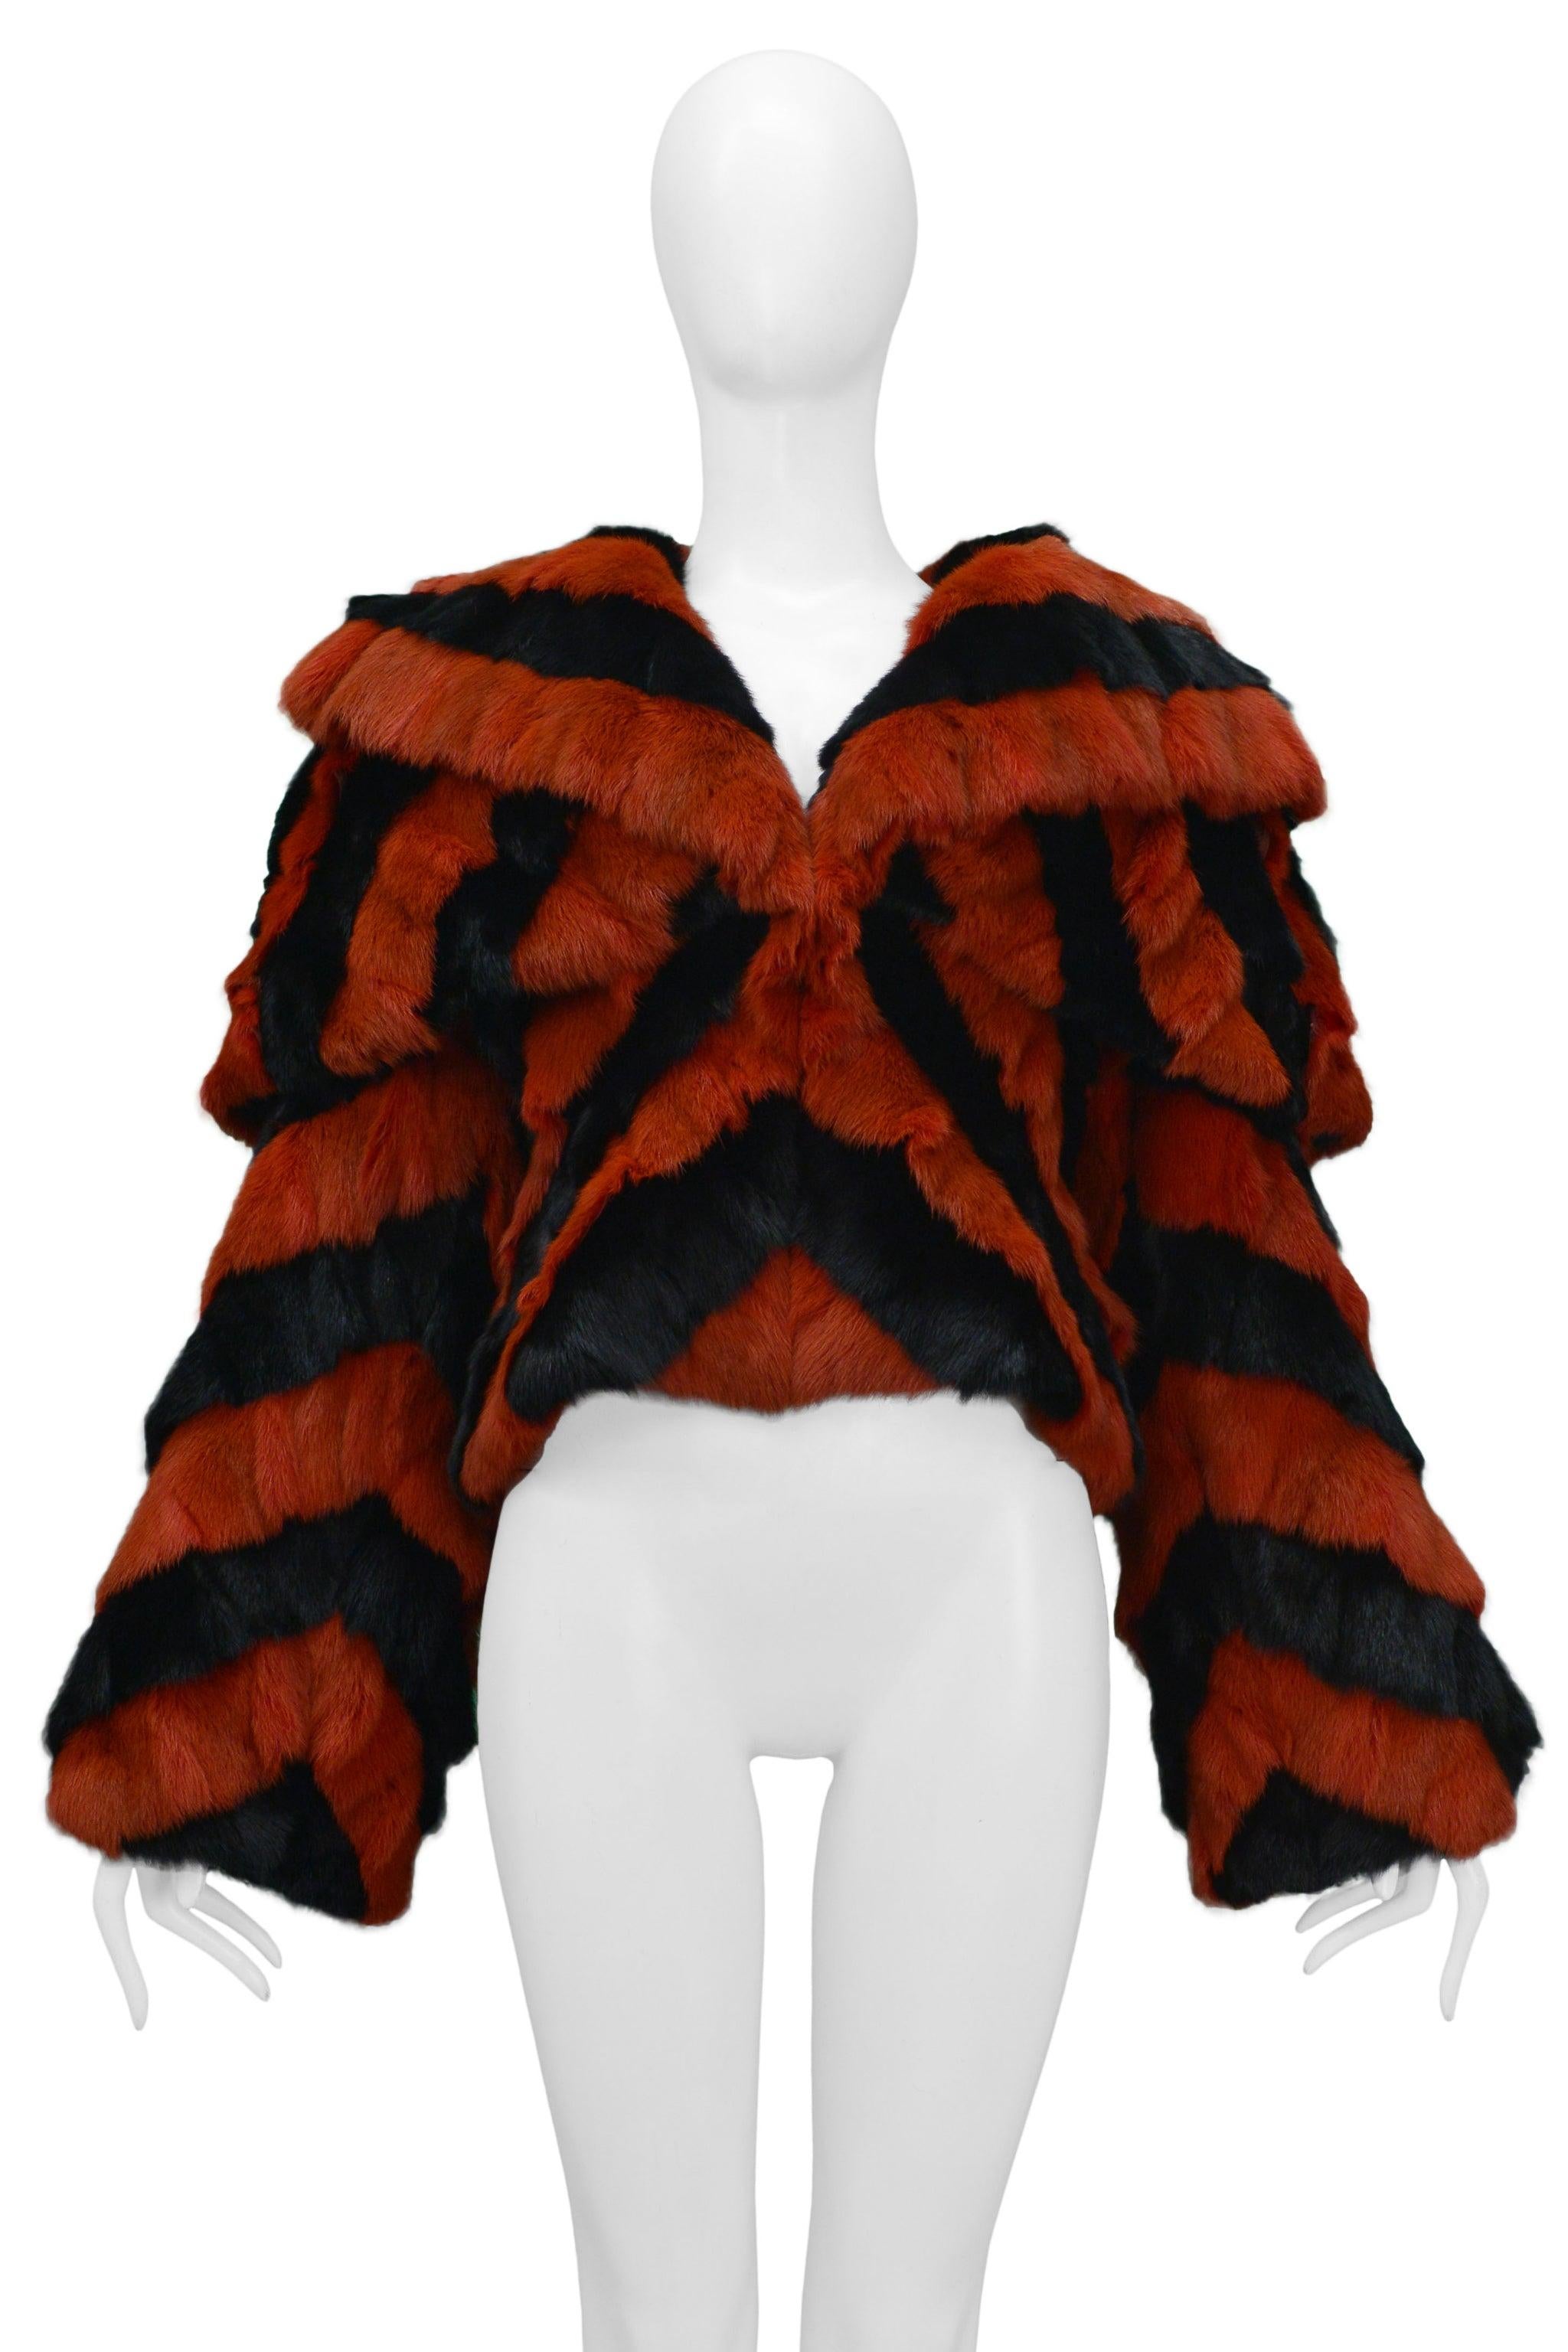 Resurrection Vintage is excited to offer an important Alexander McQueen black and red fur jacket featuring a graphic chevron design, double shawl, and bib collar, long sleeves, fitted body, and fully lined. It was shown on the runway in the 